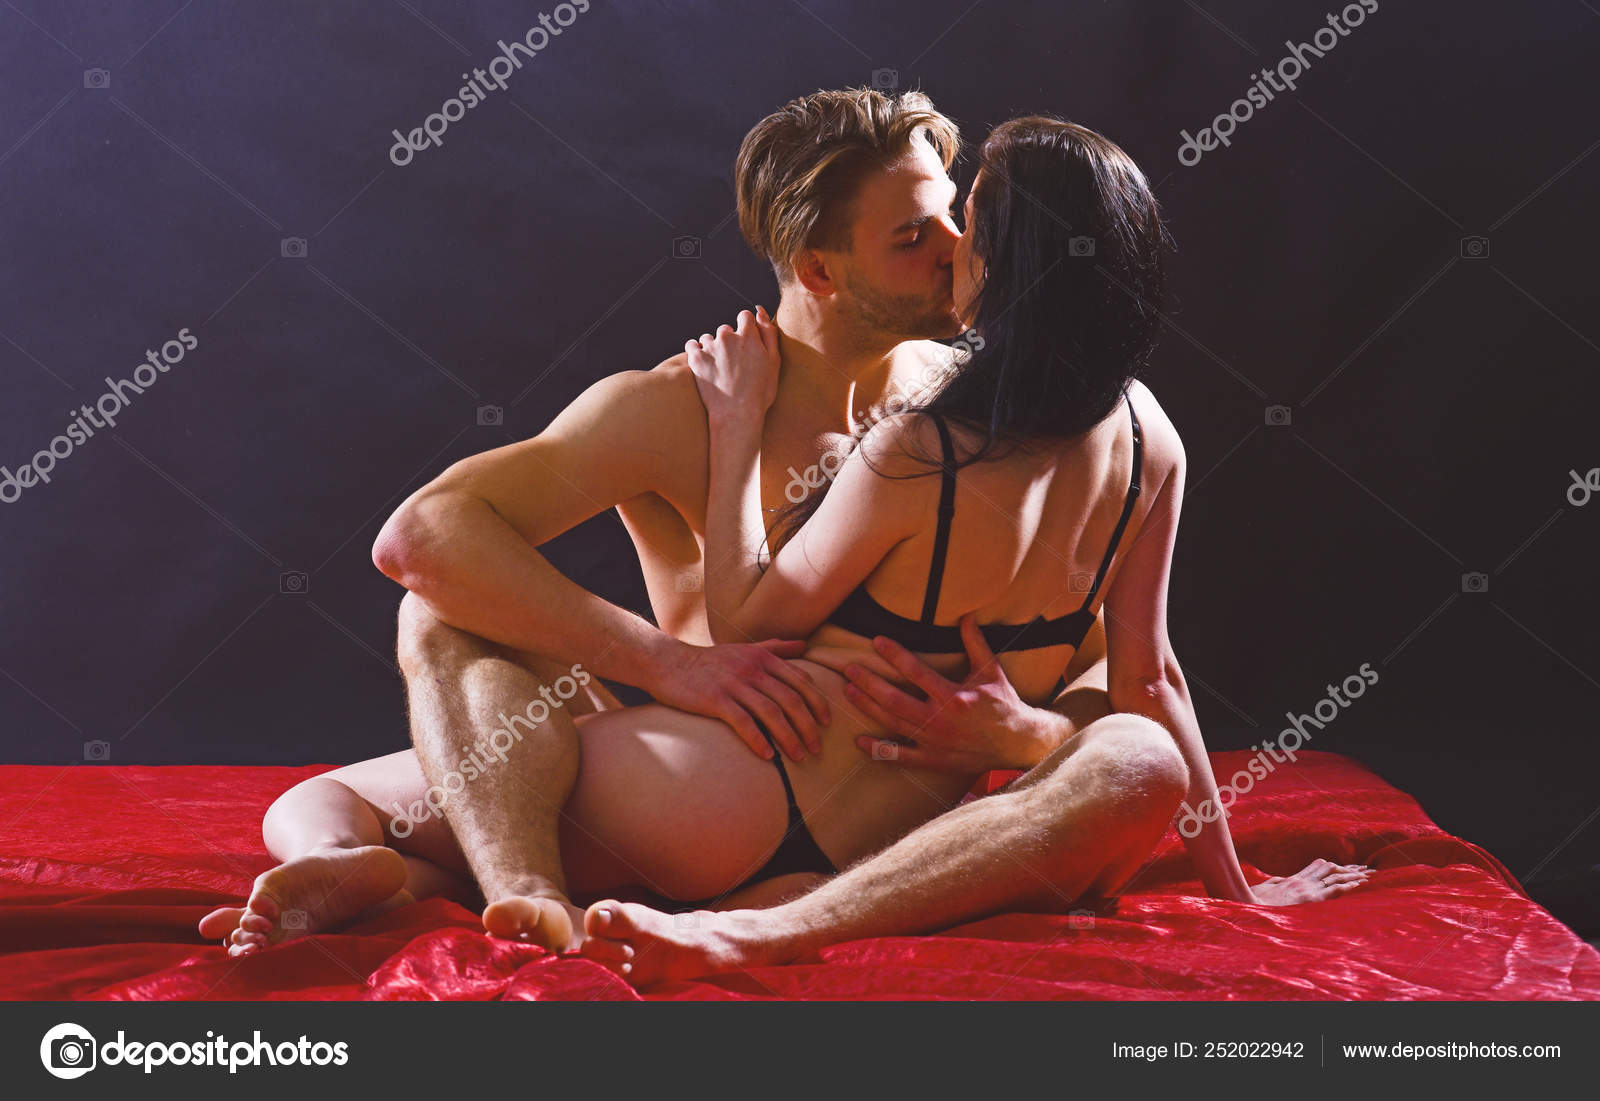 Man hug sexual girlfriend naked buttocks. Sex and love concept. Couple intimate atmosphere. Lover and sexy naked female body foreplay in pic